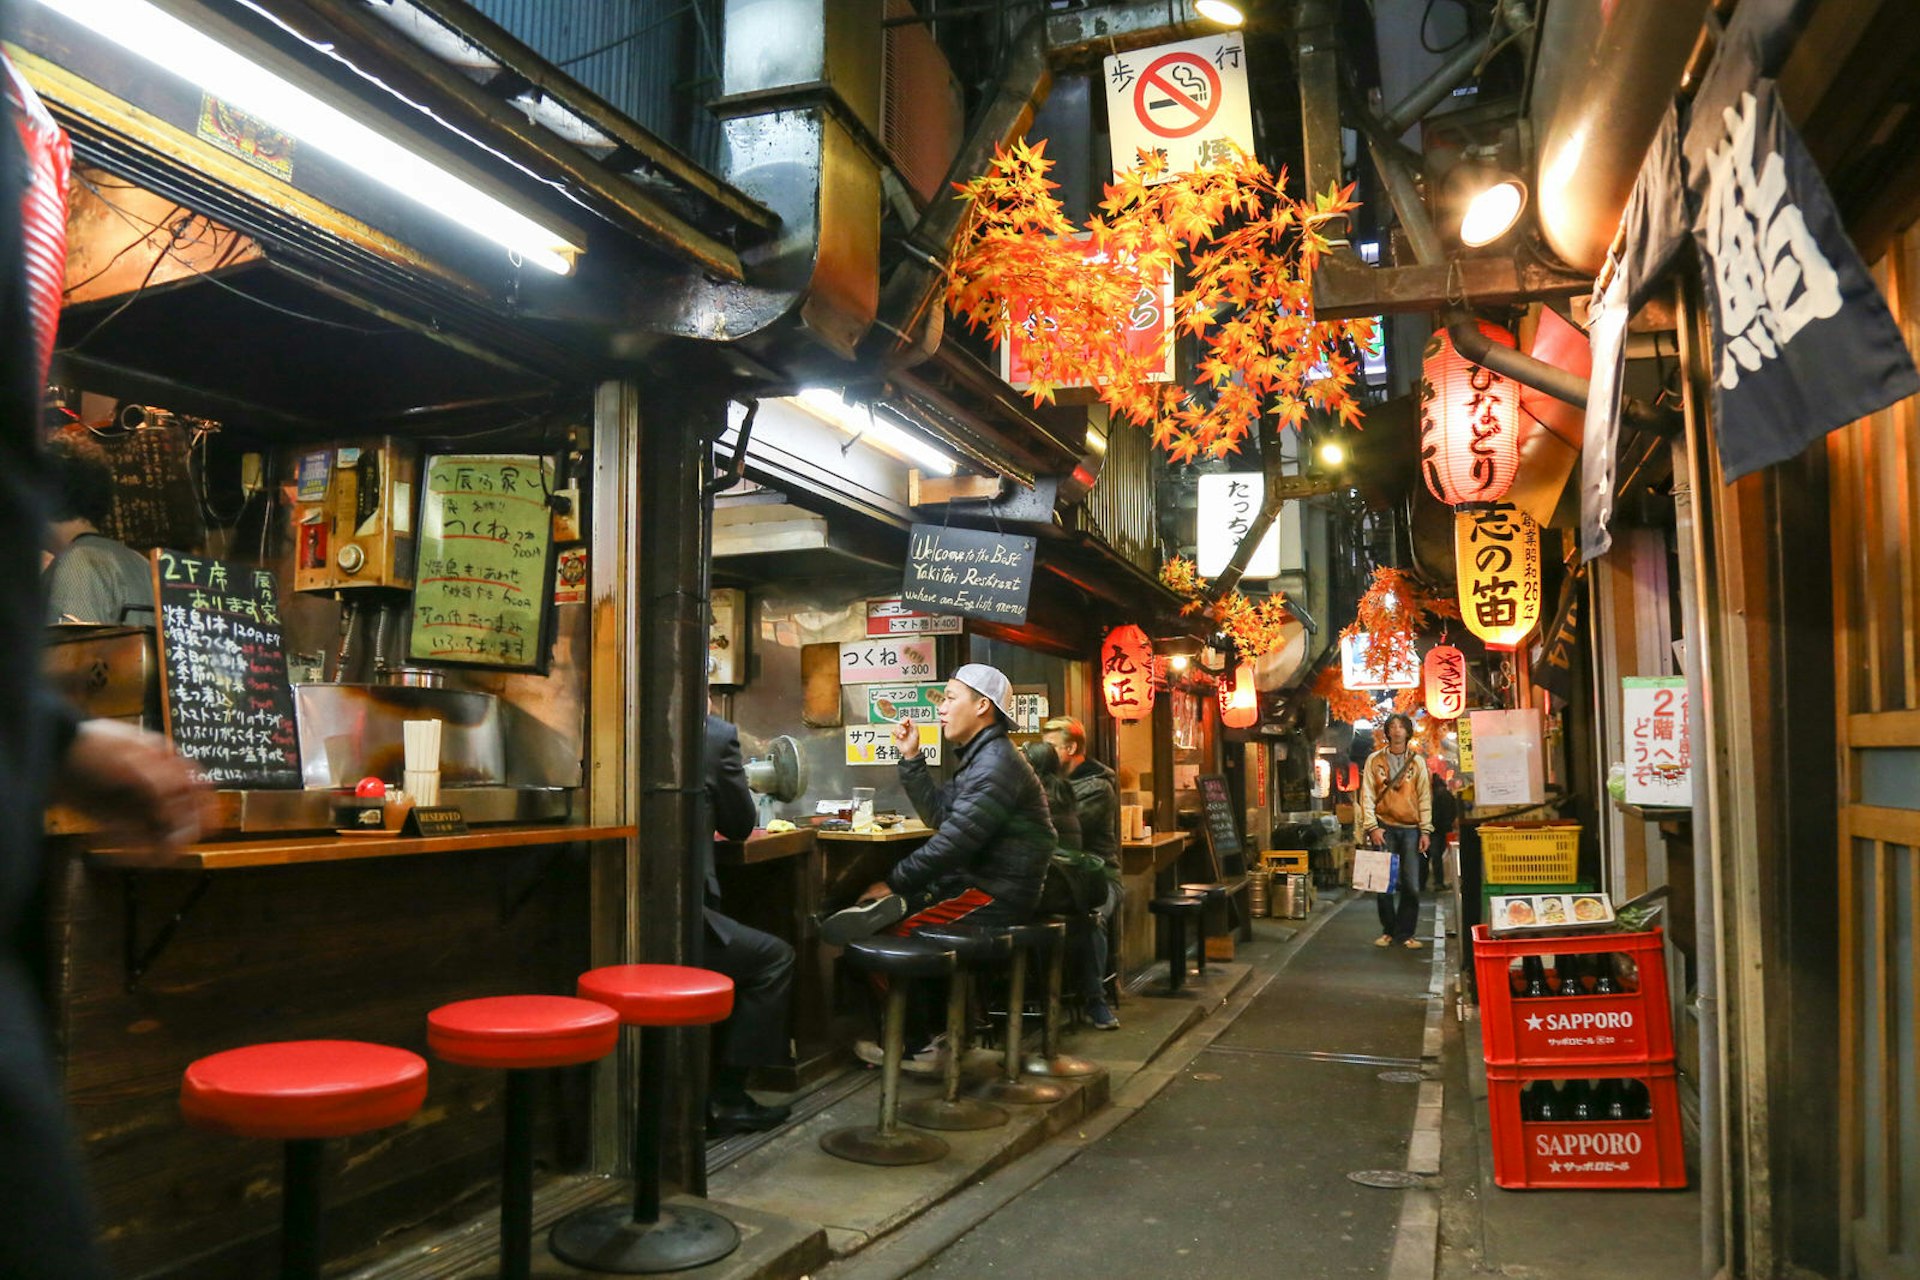 People sit on stools at small stalls along Omoide-yokochō alley